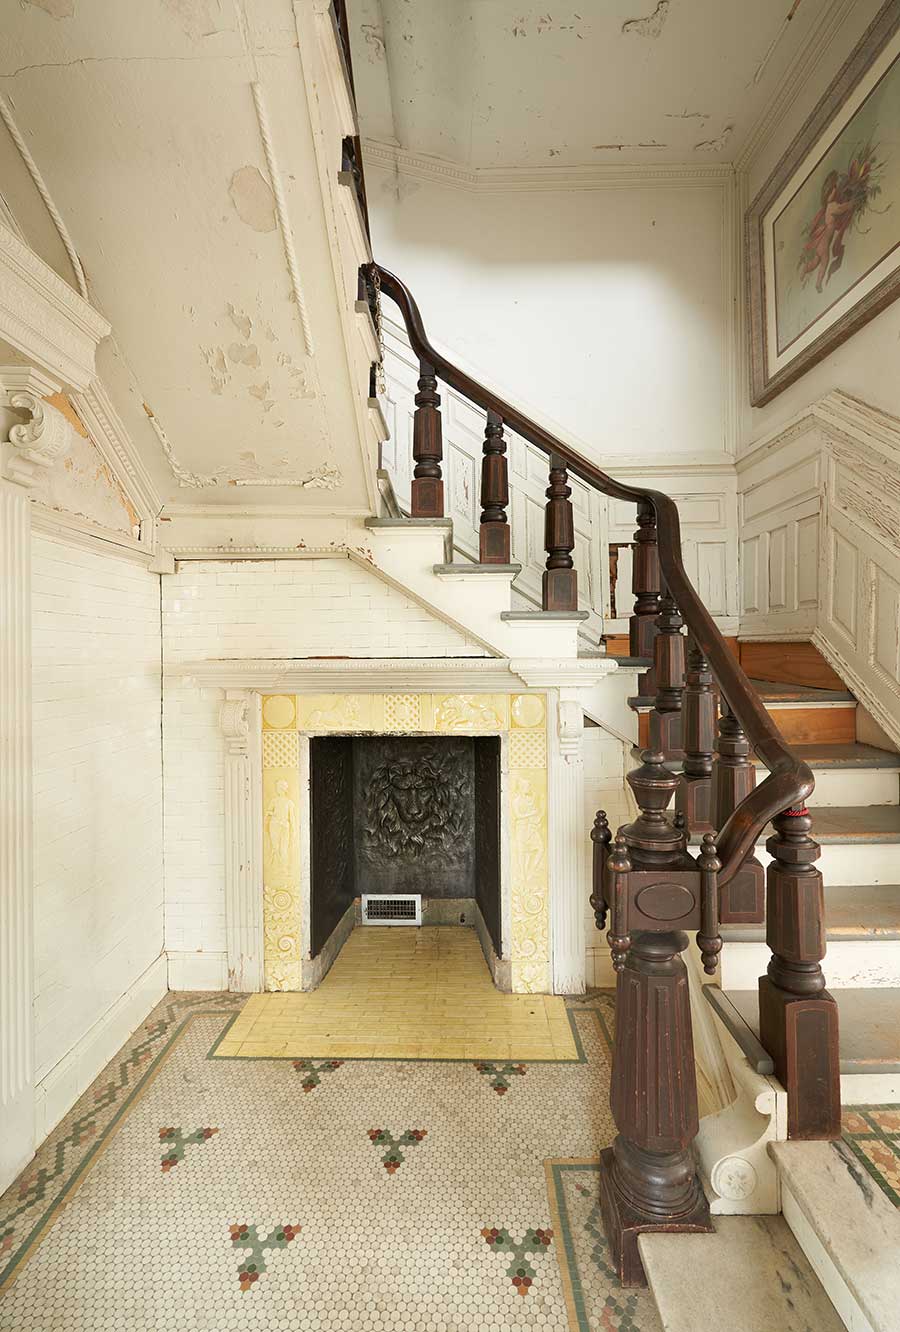 The North Staircase, before restoration